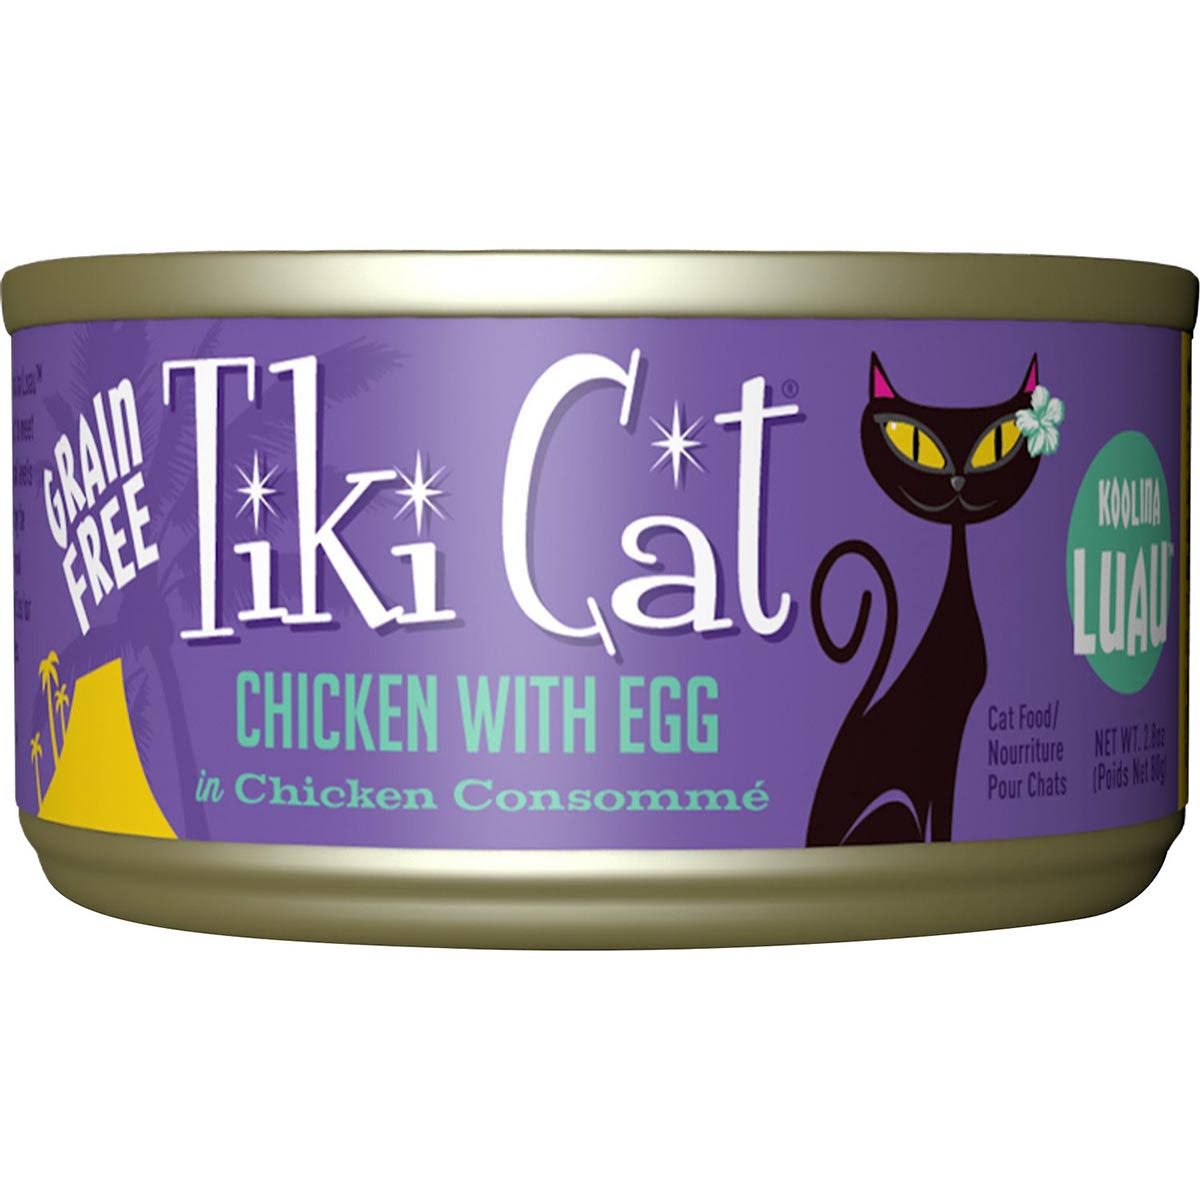 Tiki Cat Koolina Luau Chicken with Egg in Chicken Consomme 6 oz